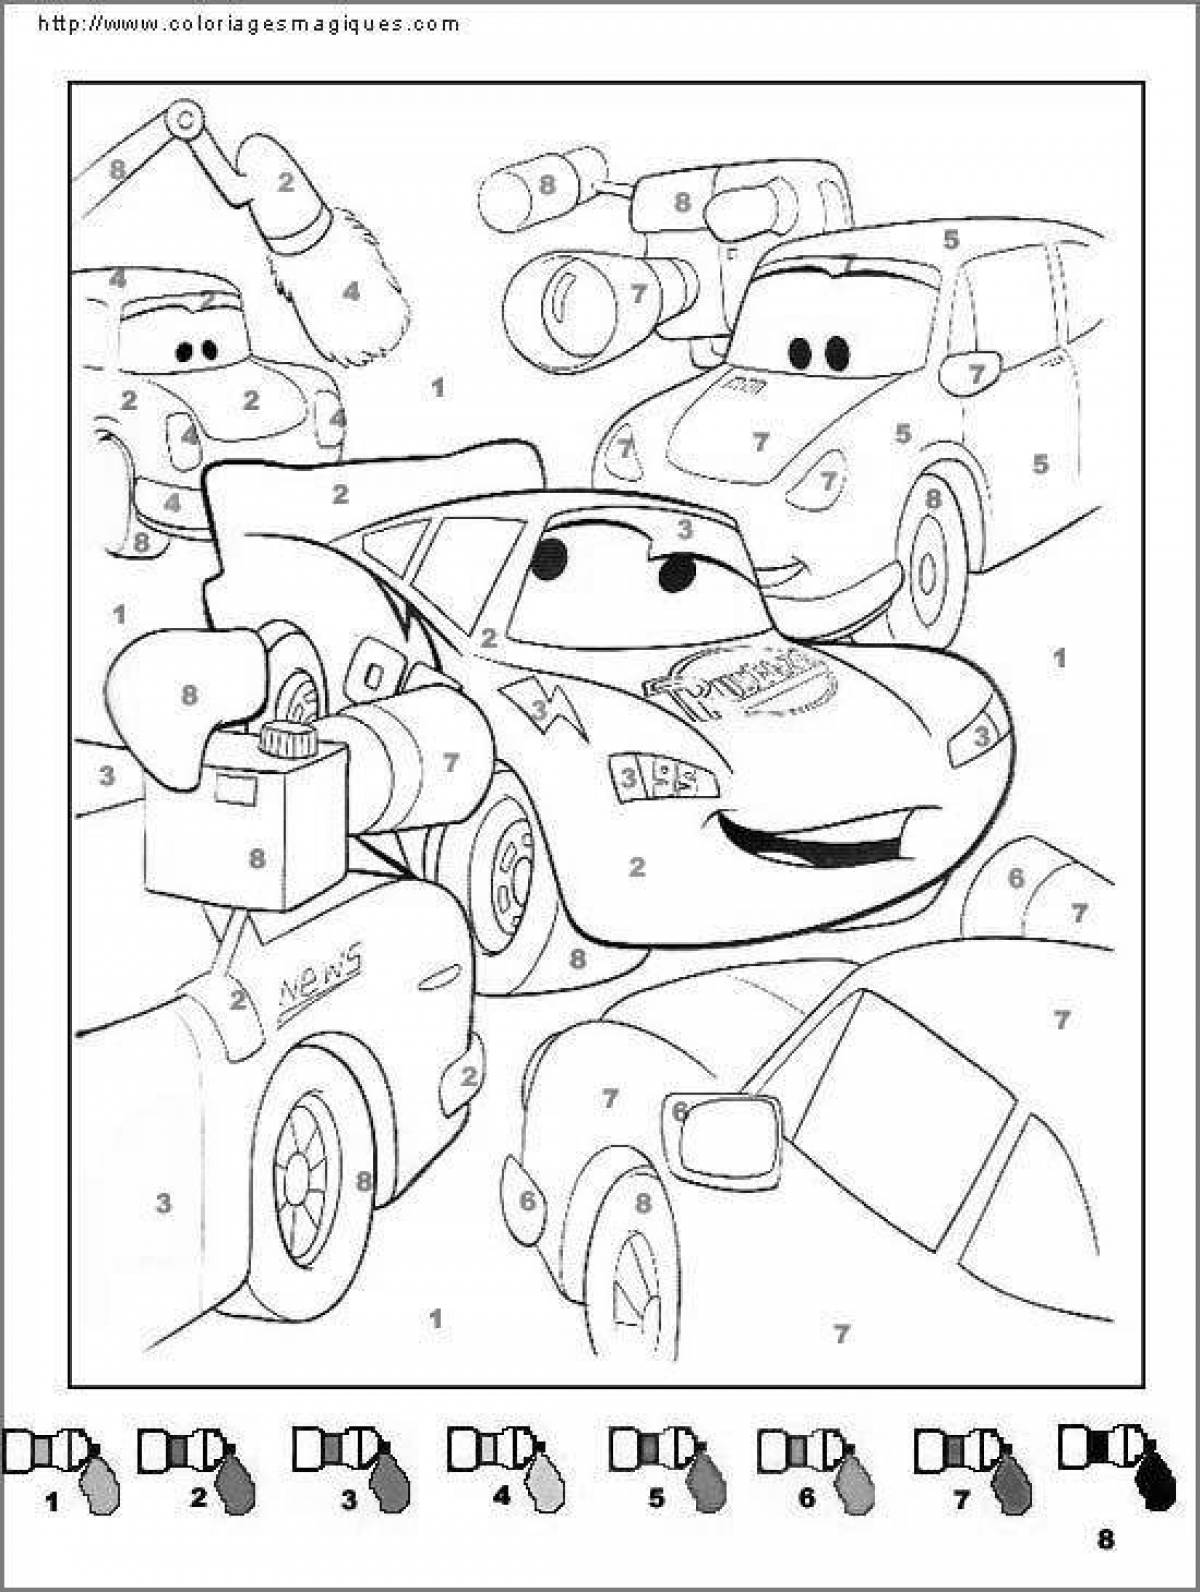 Charming cars coloring by numbers